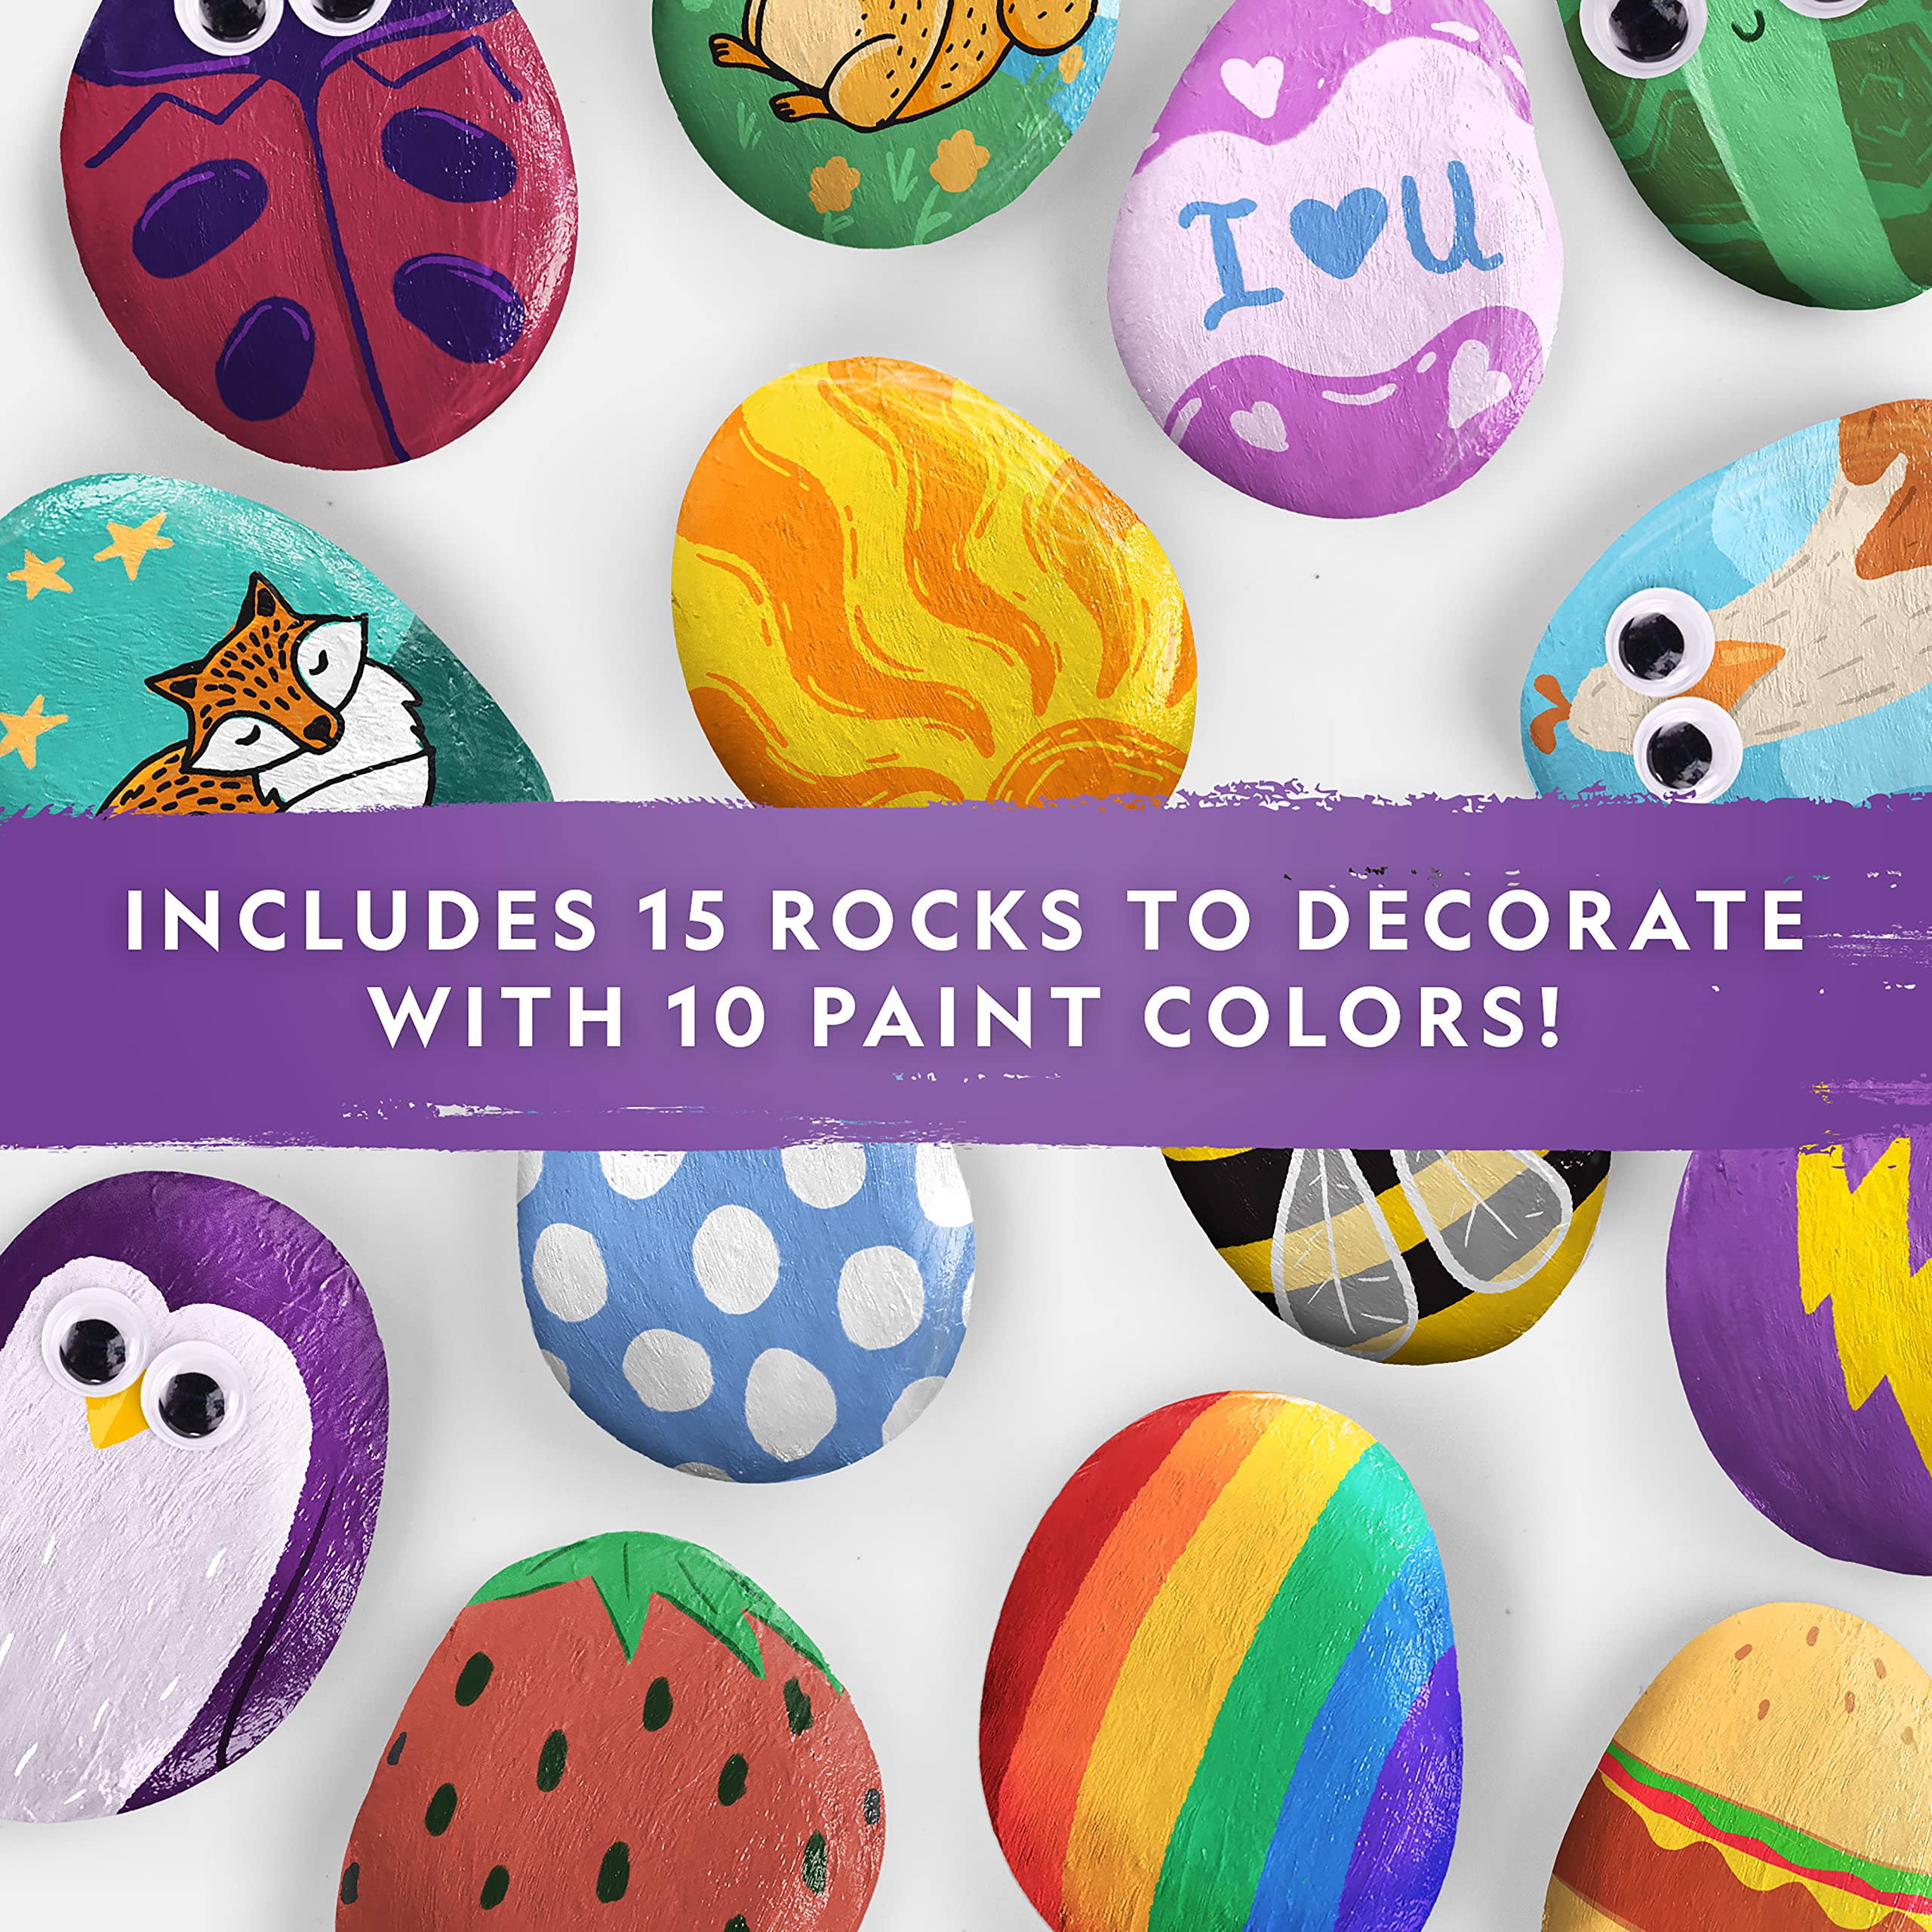 NATIONAL GEOGRAPHIC Rock Painting Kit - Arts & Crafts Kit for Kids, Paint & Decorate 15 River Rocks with 10 Paint Colors & More Art Supplies, Kids Craft, Outdoor Toys, Activity Kit